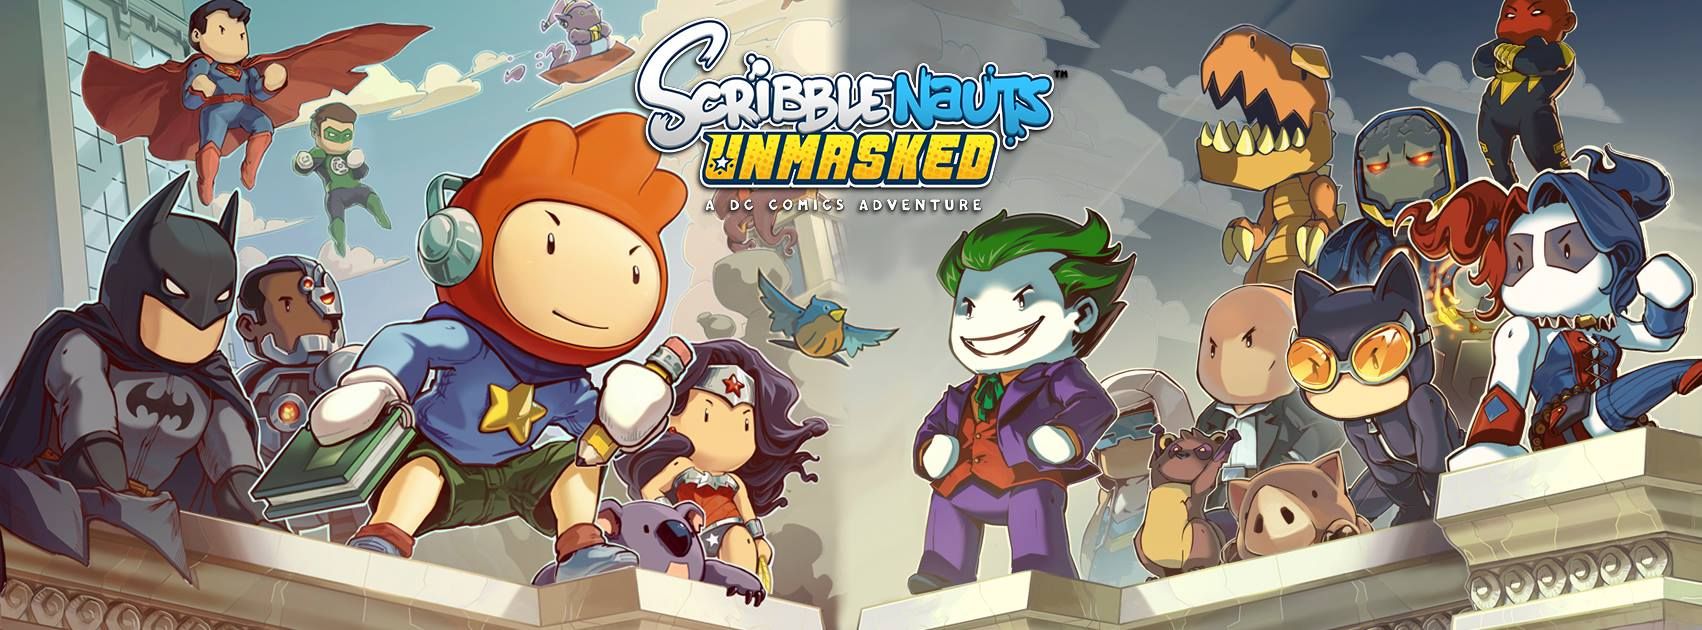 Nice wallpapers Scribblenauts Unmasked 1702x630px